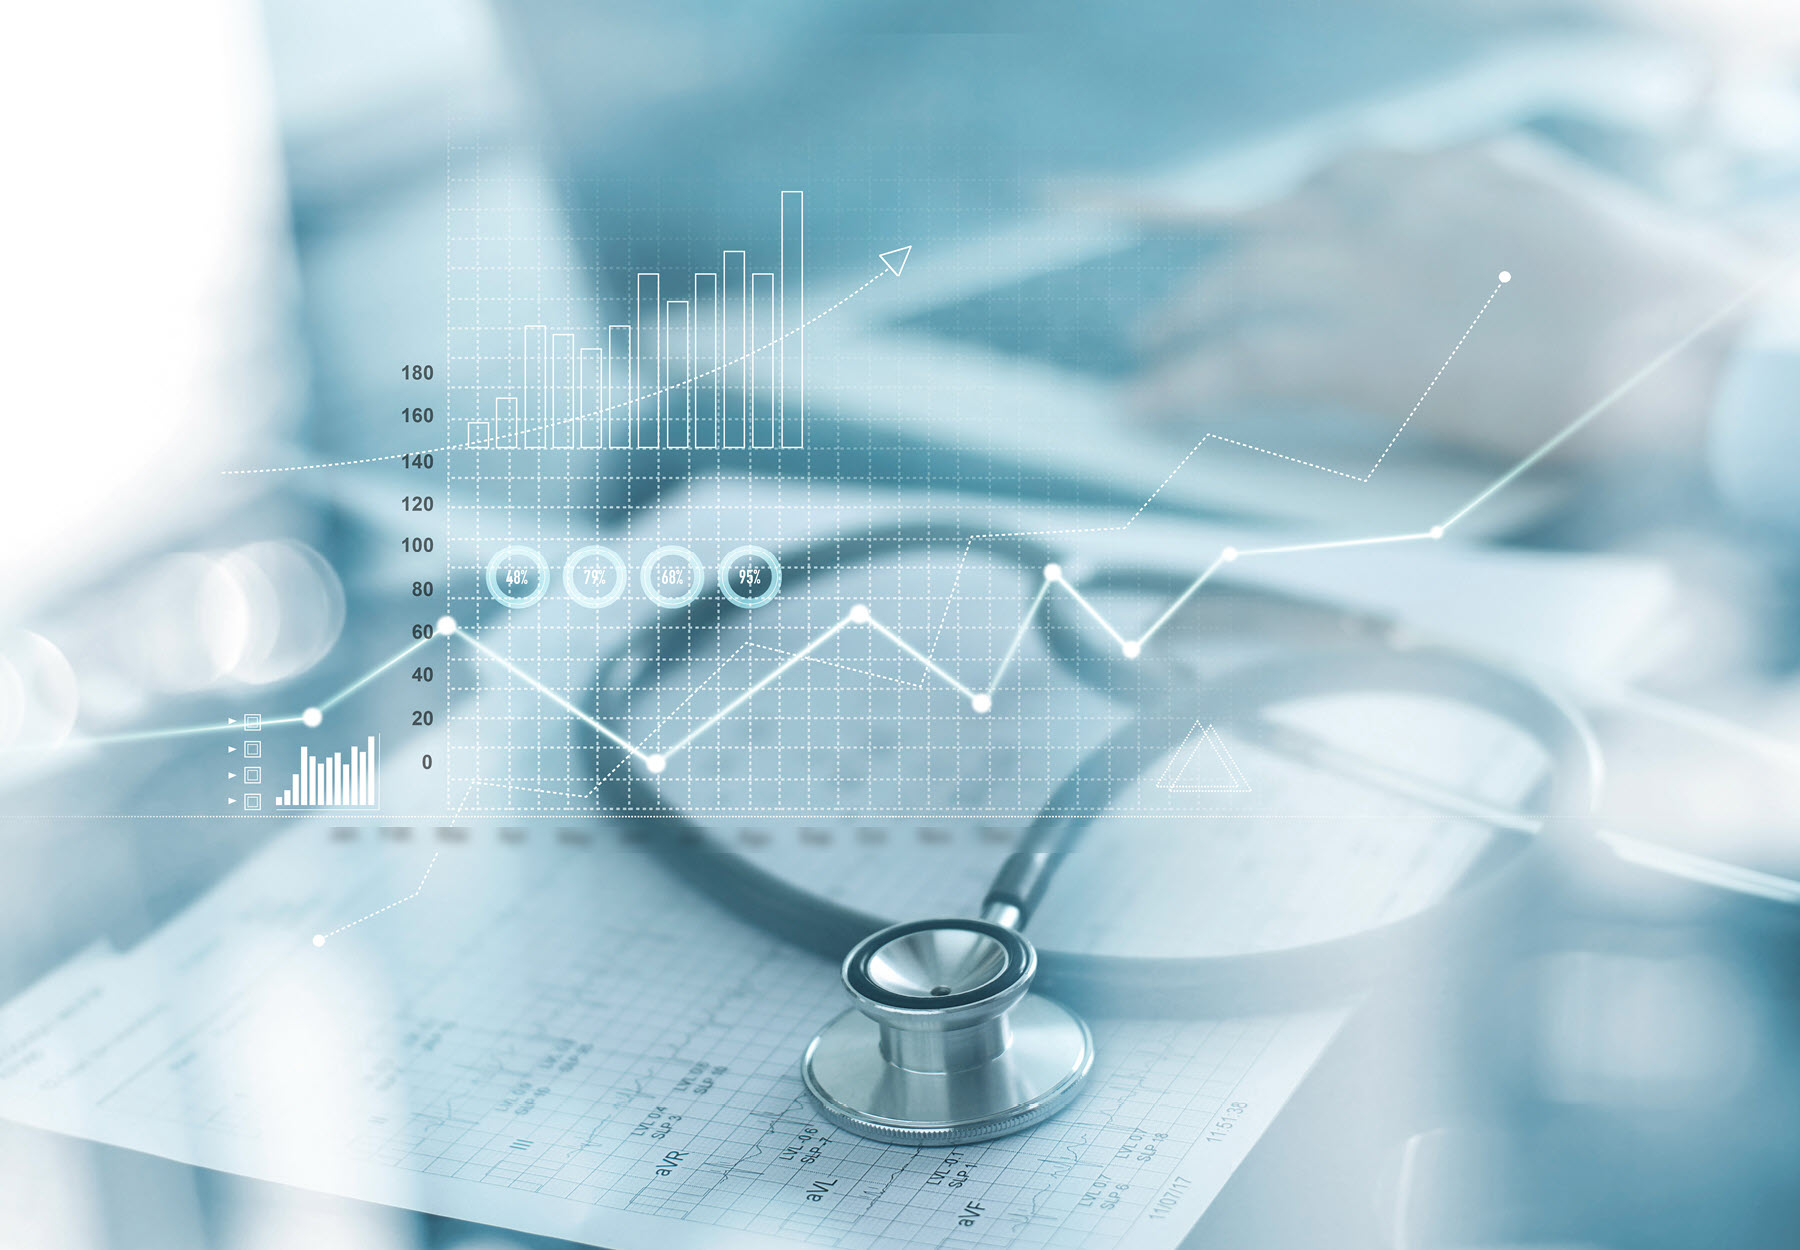 Someone typing on laptop with papers and stethoscope nearby. Graphical overlay of graph with numbers trending upward. Healthcare industry concept. Light blue tones. iStock image.